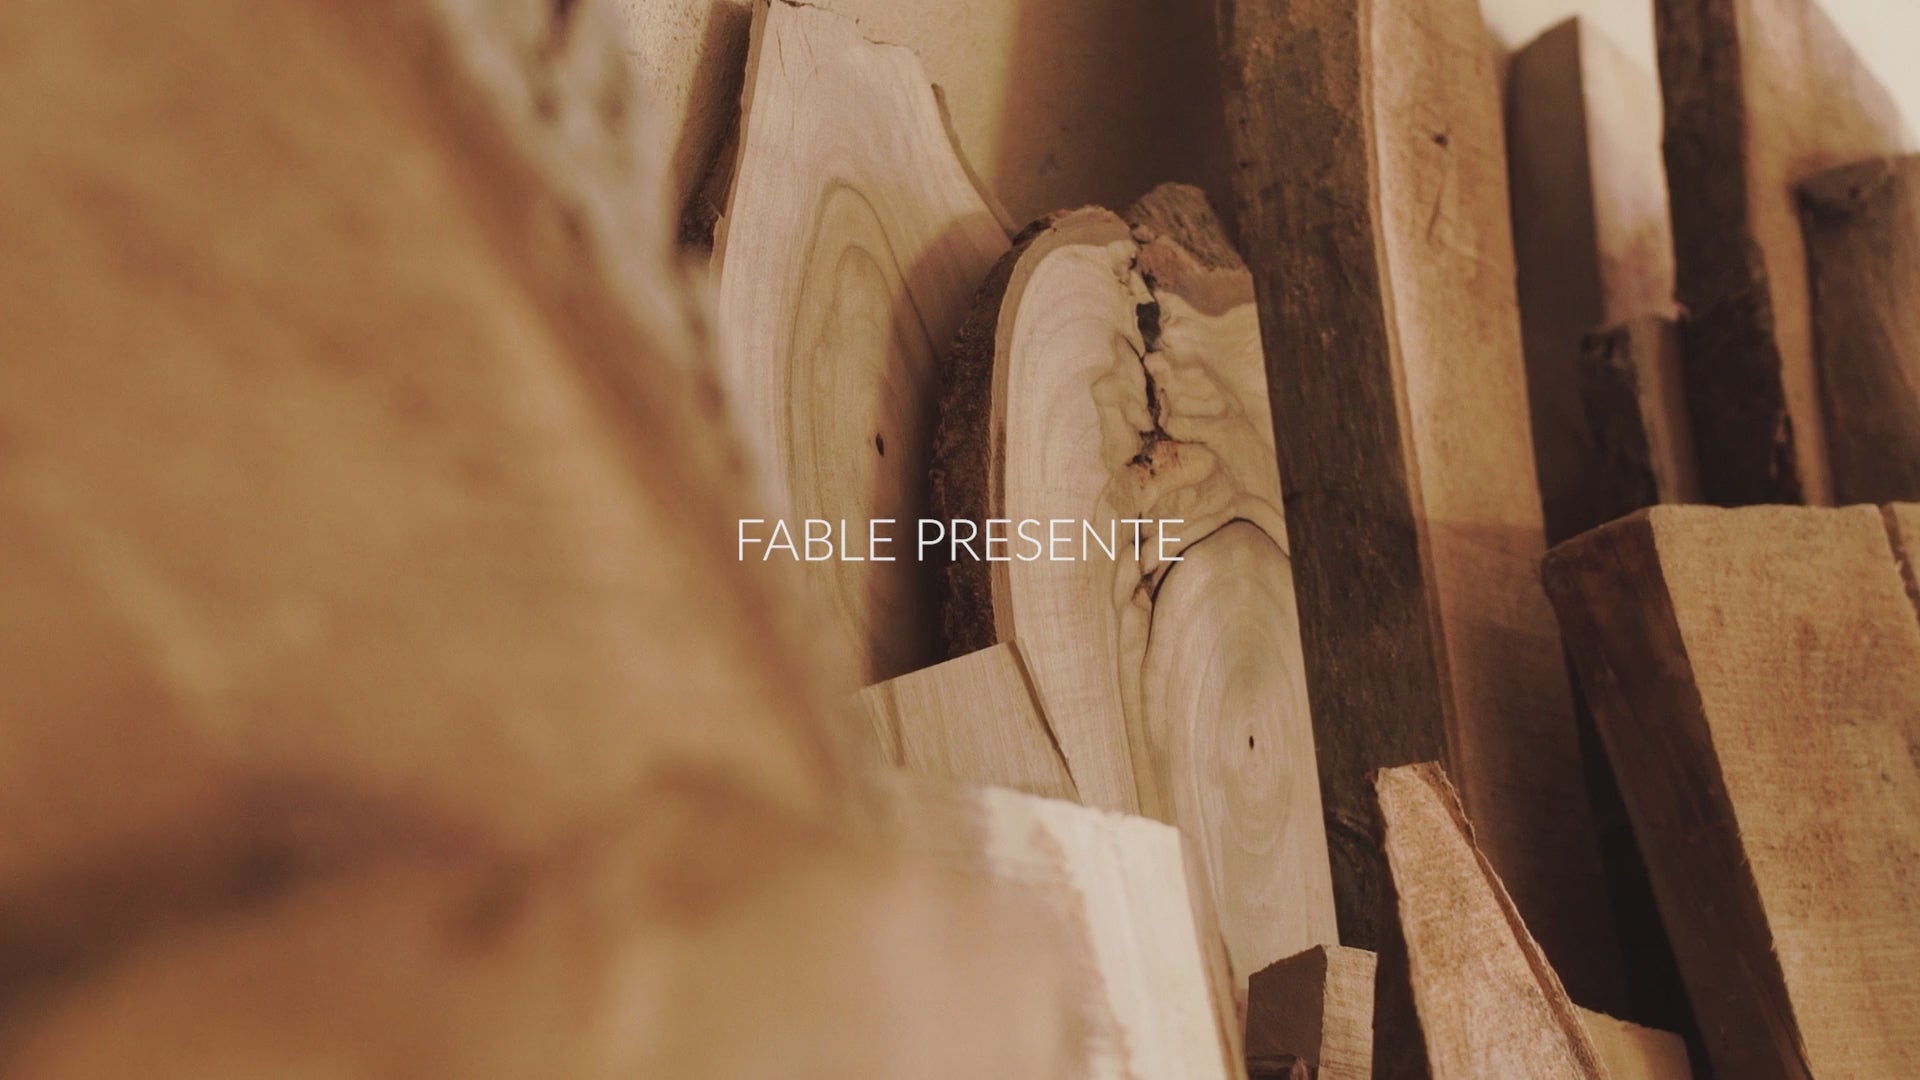 Load video: Video Presentation Fable - Manufacture of quality decorative objects